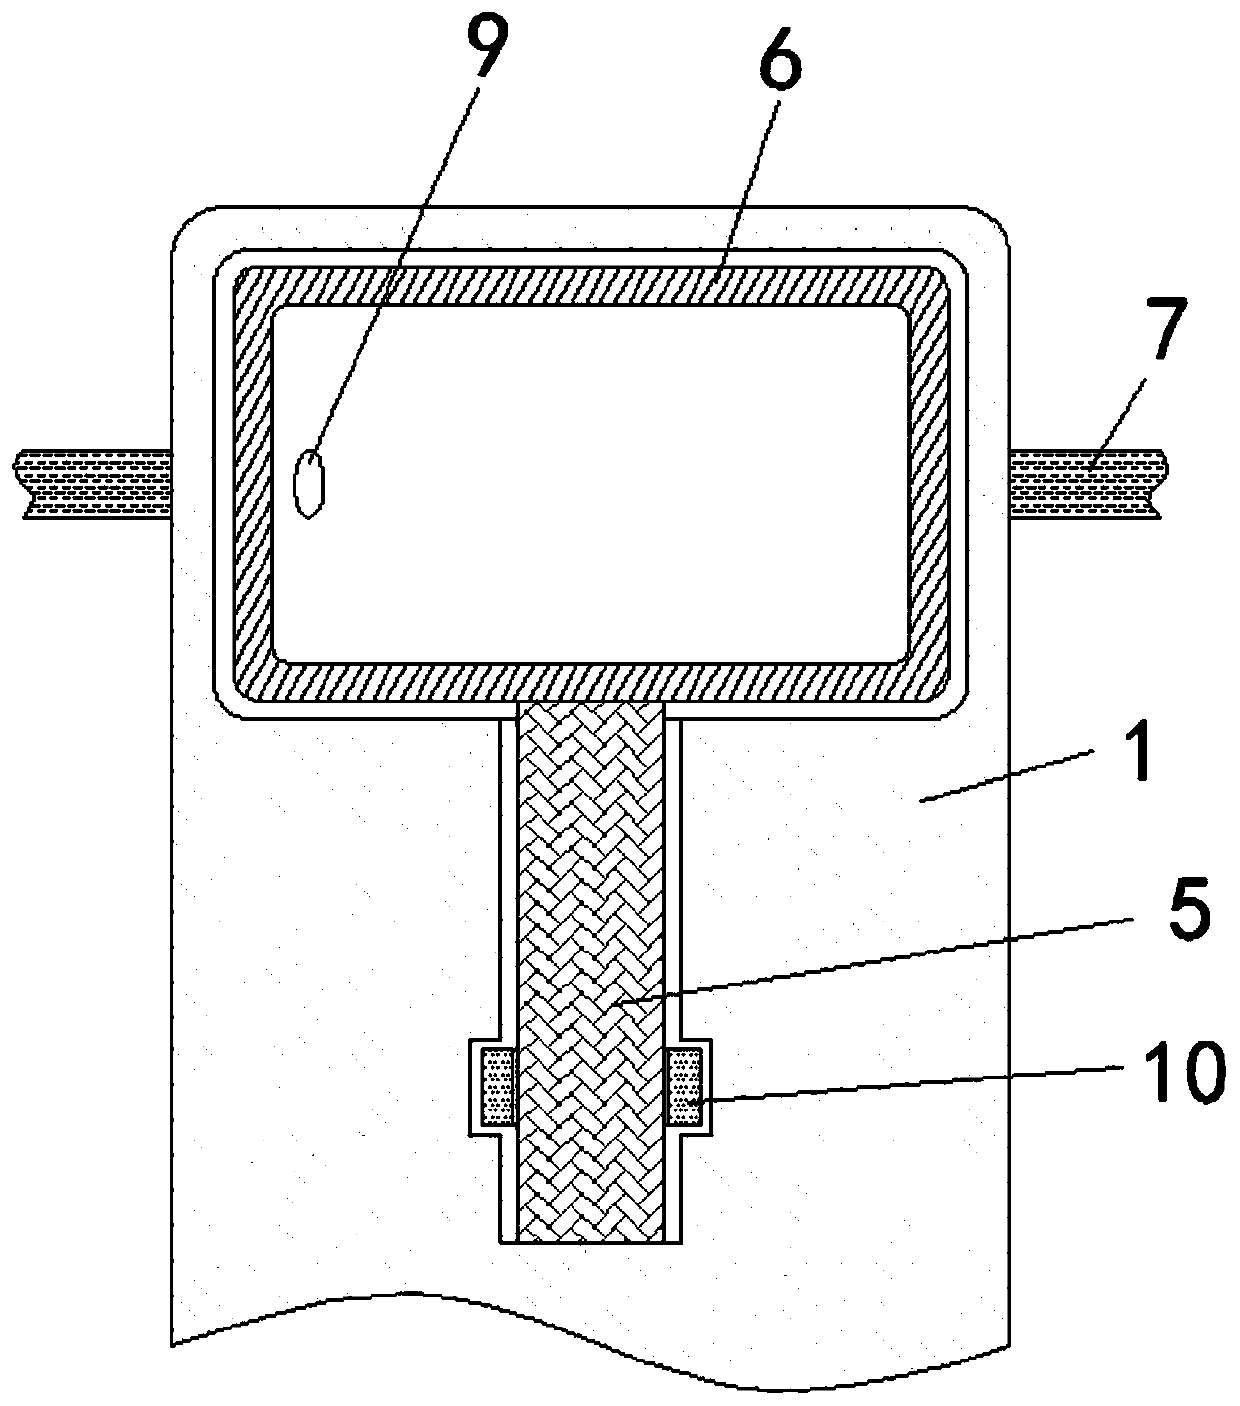 Waste refrigerant recycling and adjusting device based on weight change